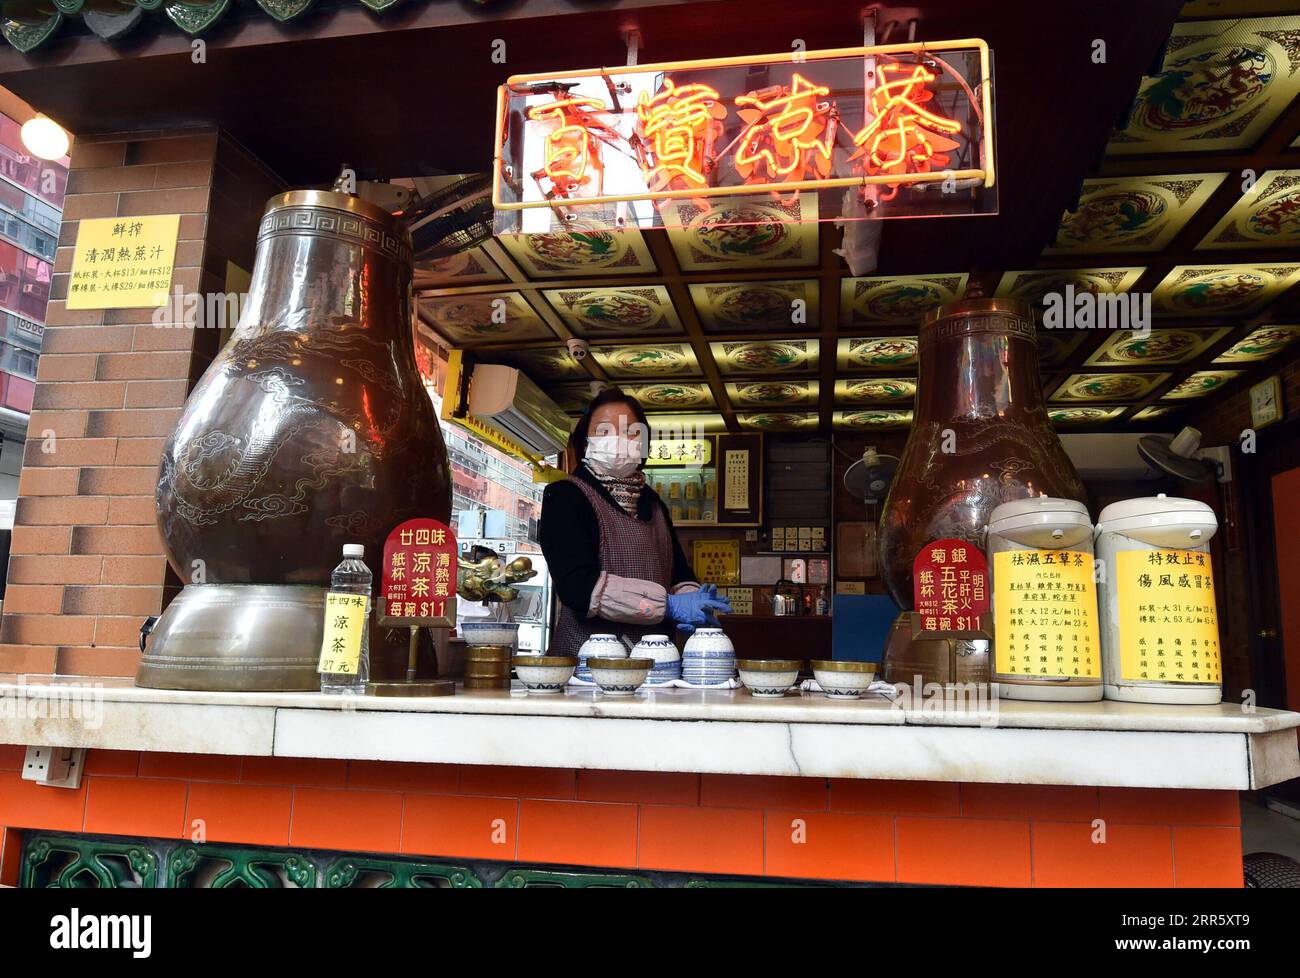 210118 -- HONG KONG, Jan. 18, 2021 -- A staff member is seen at a herbal tea shop in south China s Hong Kong, Jan. 18, 2021. Hong Kong s Center for Health Protection CHP reported 107 additional confirmed cases of COVID-19 on Monday, a new high in about one month. The new cases included 102 local infections and five imported ones, taking its total tally to 9,664. More than 40 of the new local cases were untraceable and there were about 50 cases tested positive preliminarily, according to a CHP press briefing.  CHINA-HONG KONG-COVID-19CN LoxPingxFai PUBLICATIONxNOTxINxCHN Stock Photo